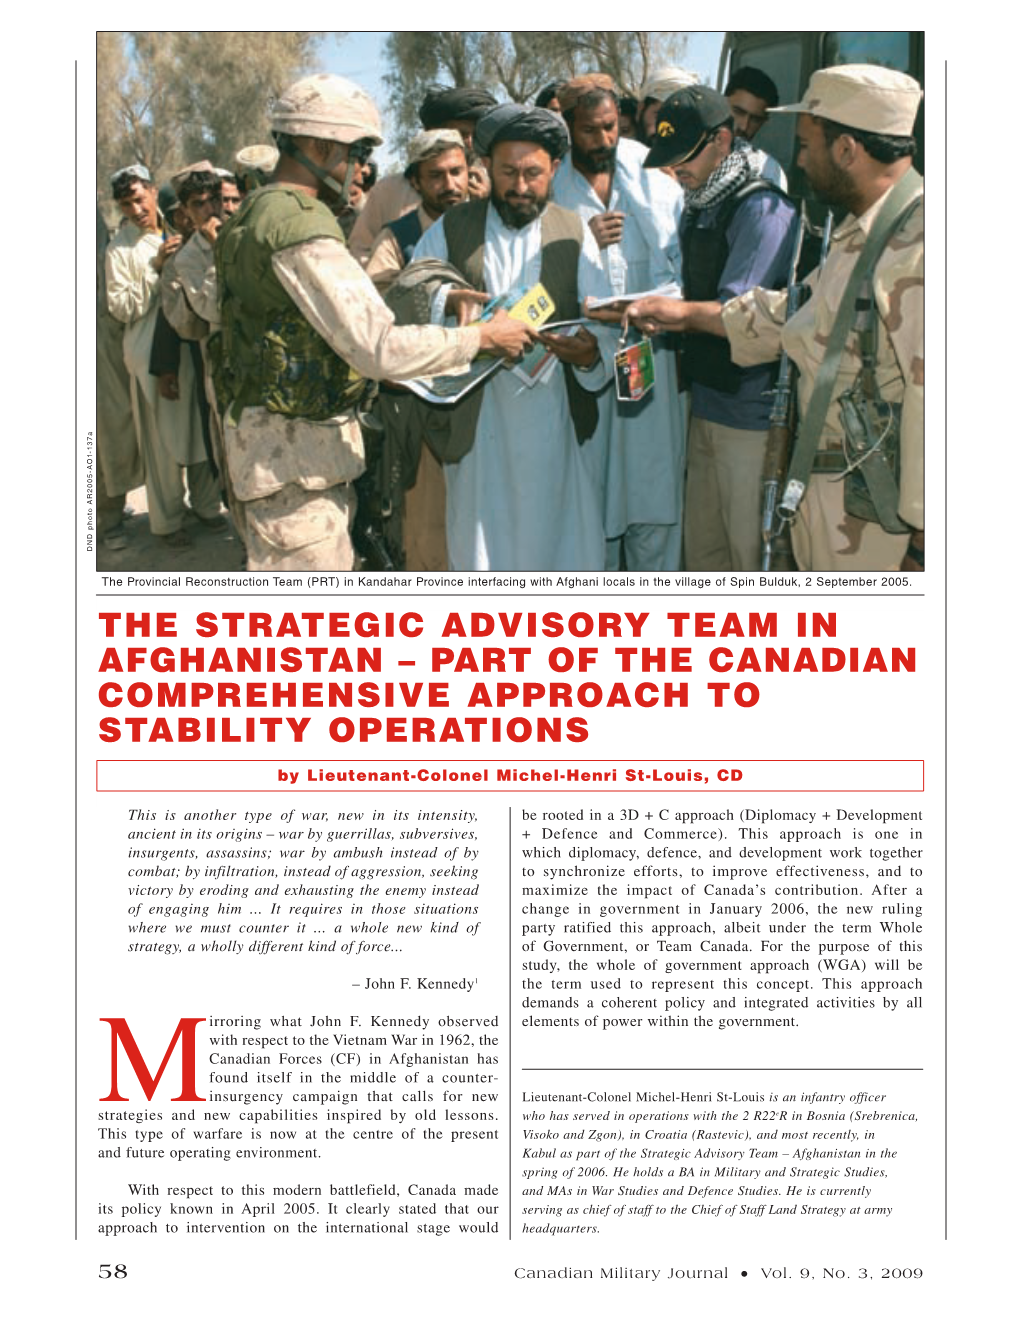 The Strategic Advisory Team in Afghanistan – Part of the Canadian